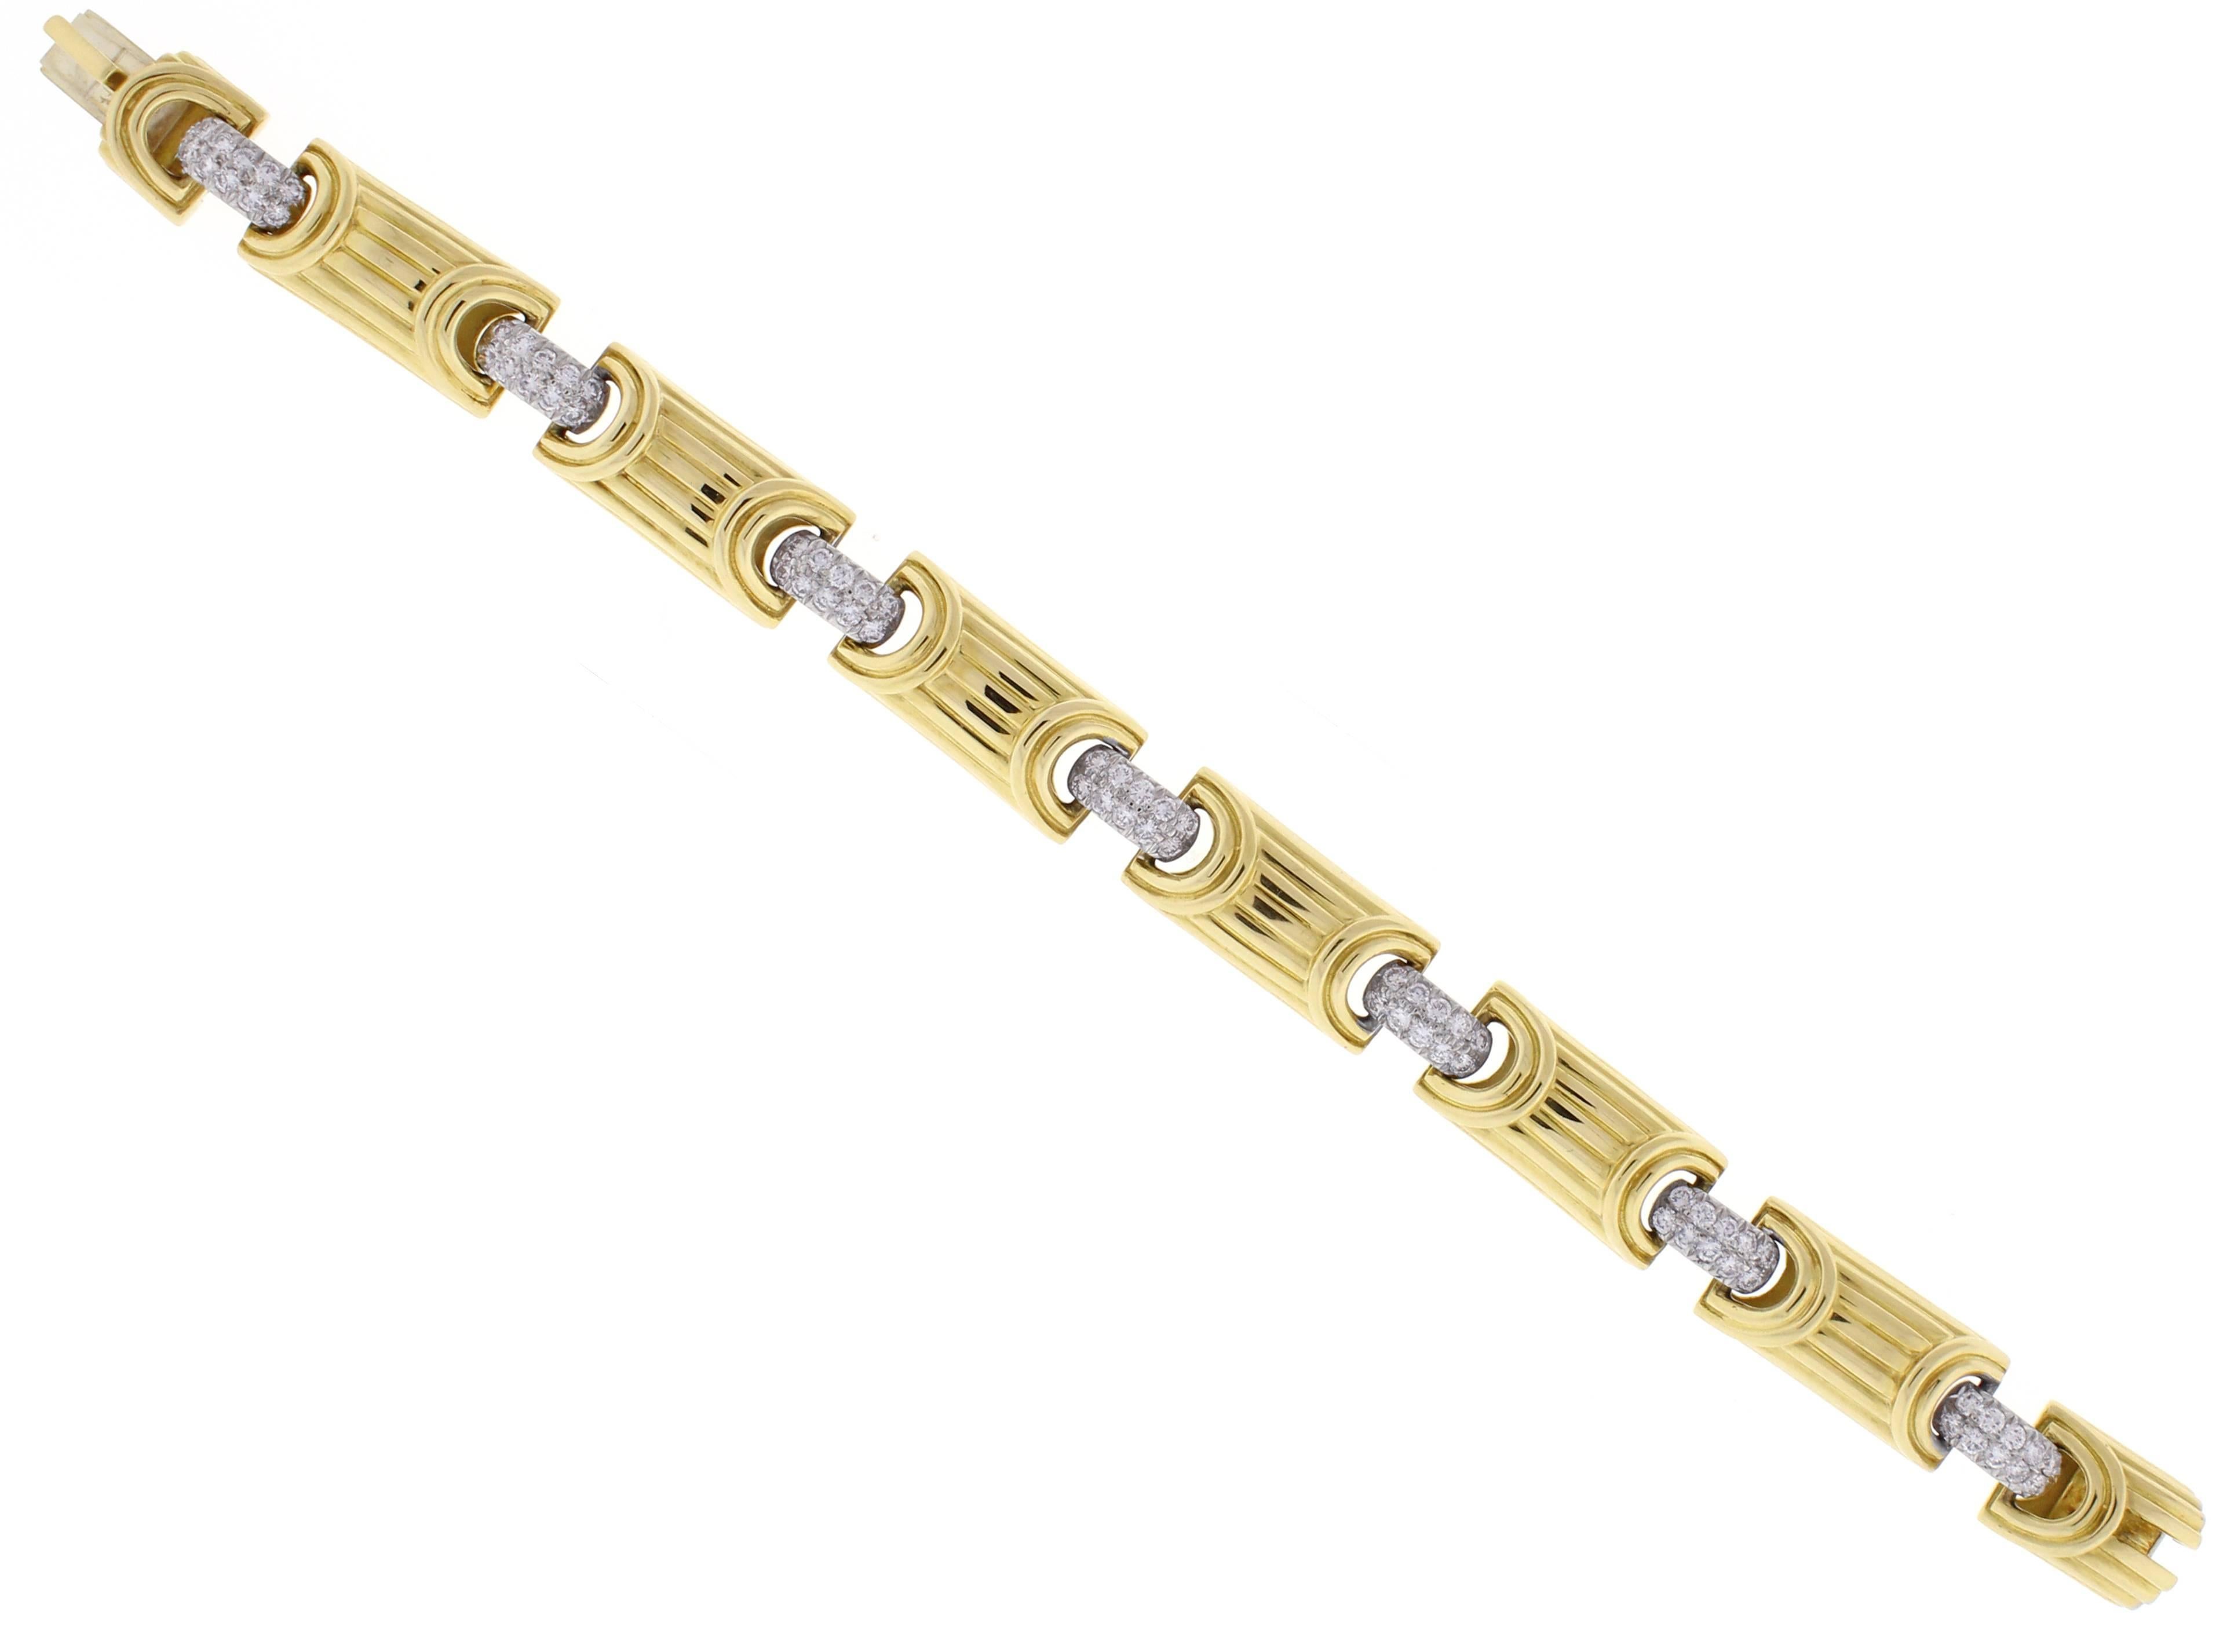 From iconic New york Jeweler Black, Starr & Frost this stunning 18 karat gold and diamond bracelet. The bracelet contains 70 brilliant diamonds weighing 2.25 carats. 7 1/4 inches long